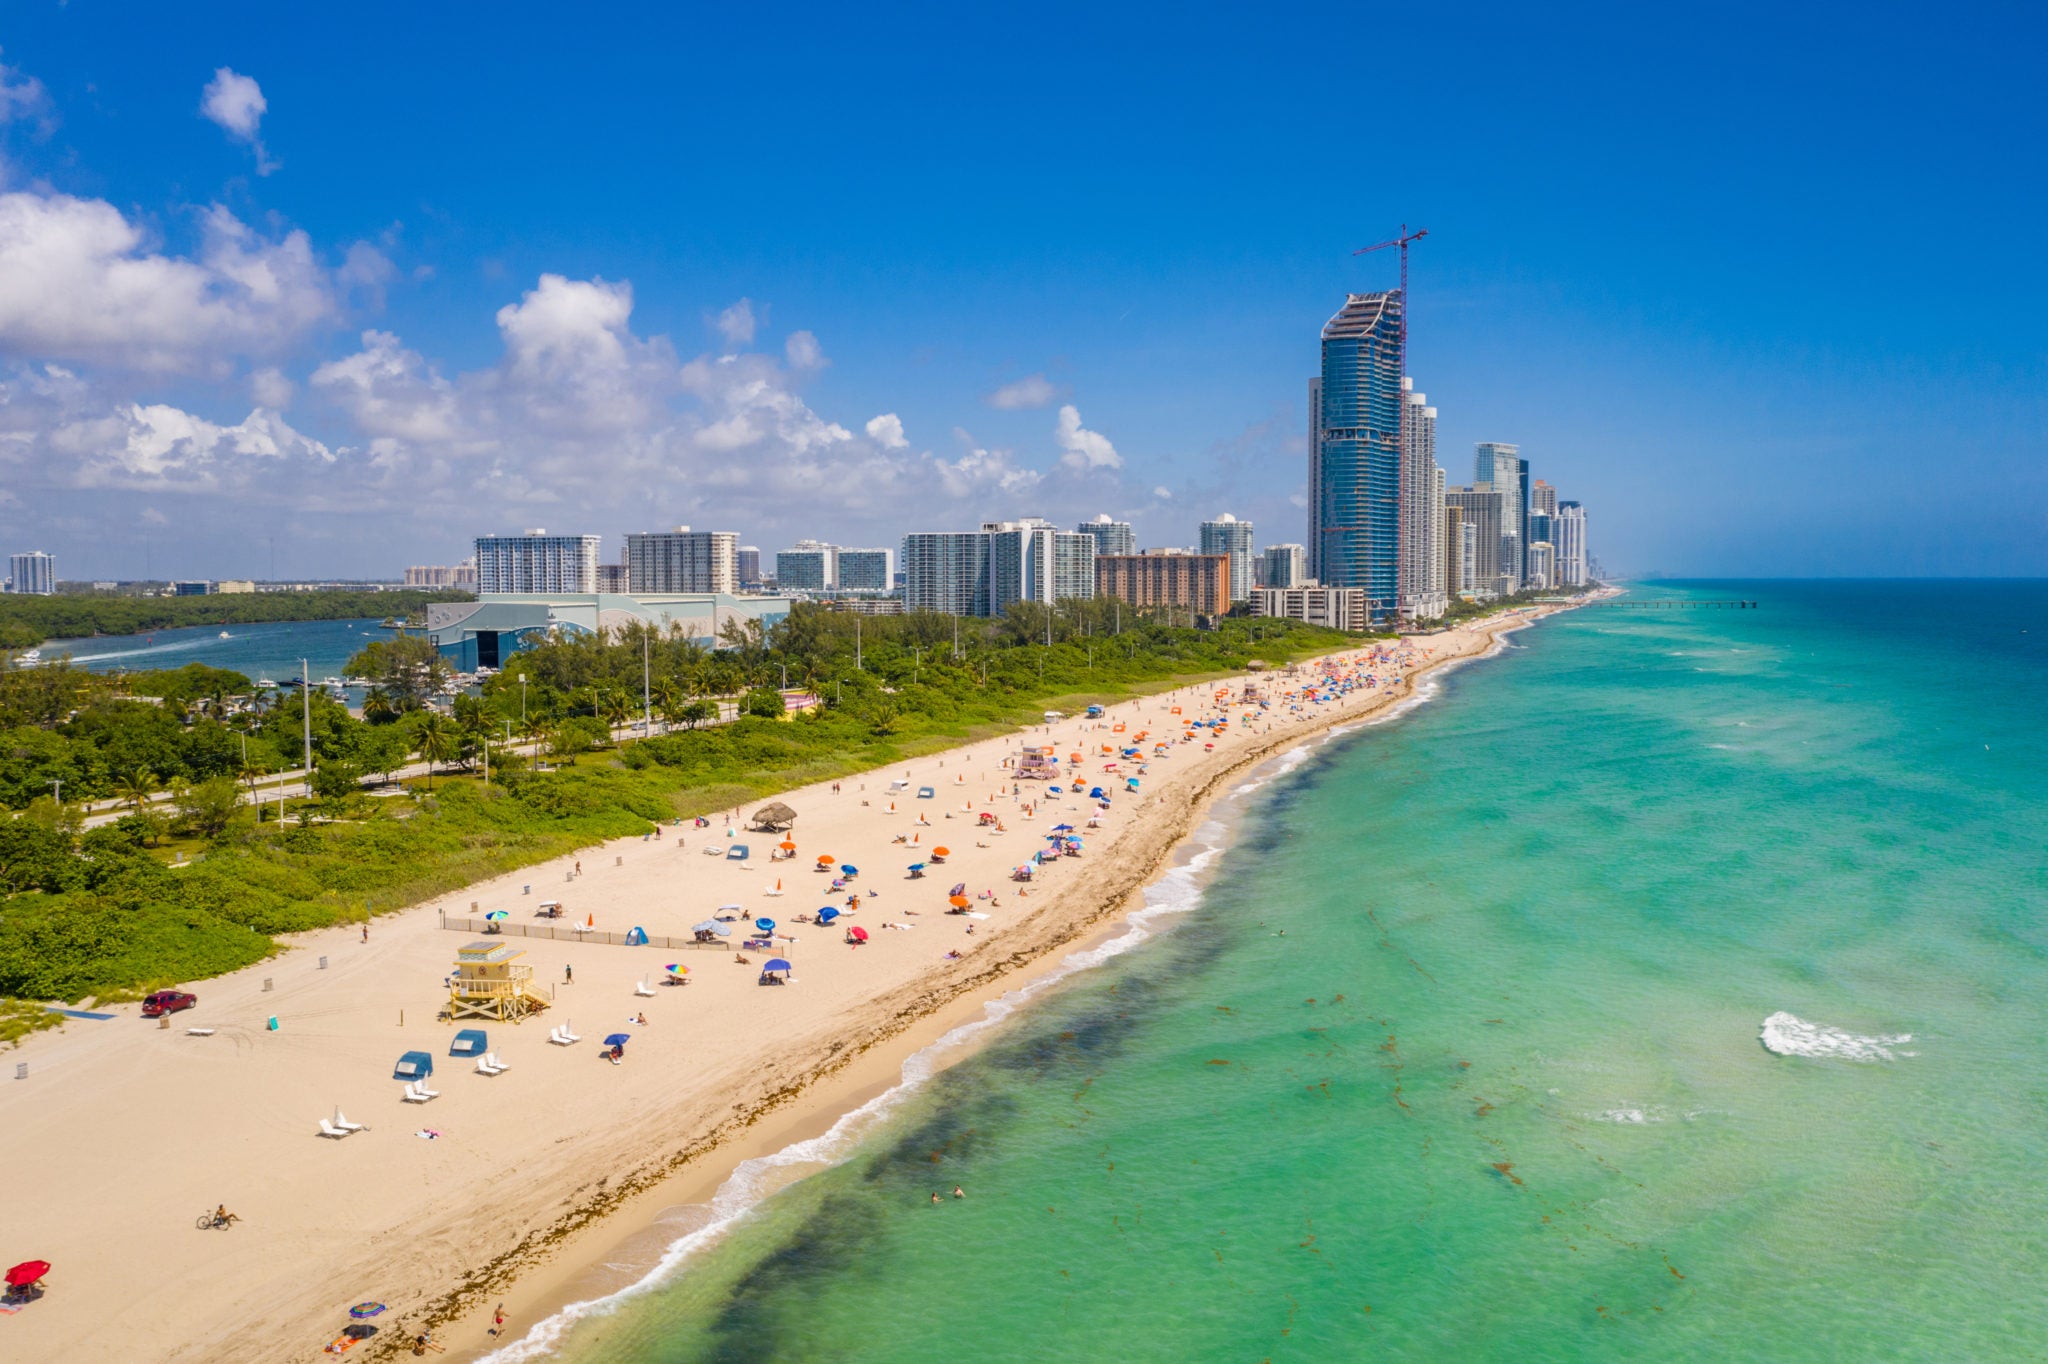 30 Best Things To Do in Miami & Miami Beach [2021]